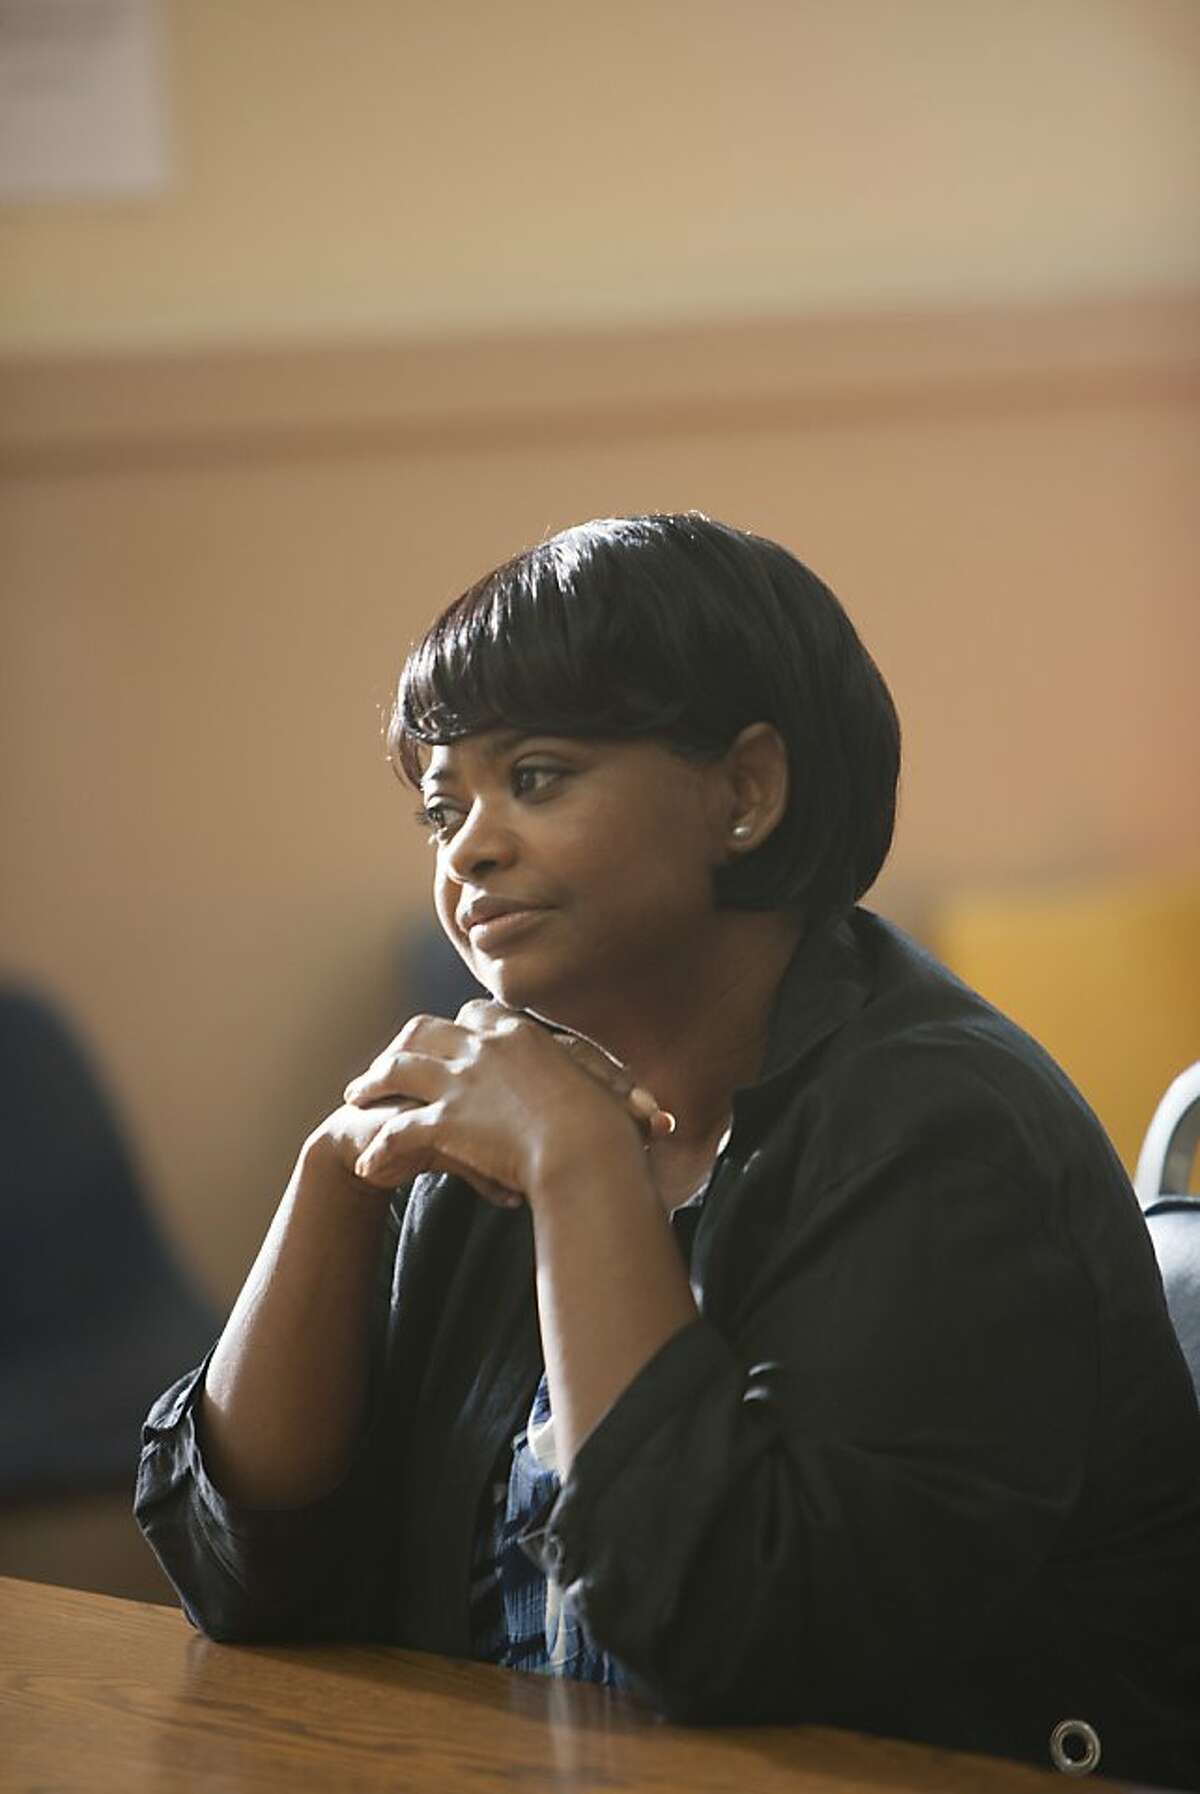 Octavia Spencer at Oscar Grant's mom in "Fruitvale Station." FRUITVALE STATION © 2013 The Weinstein Company. All Rights Reserved.